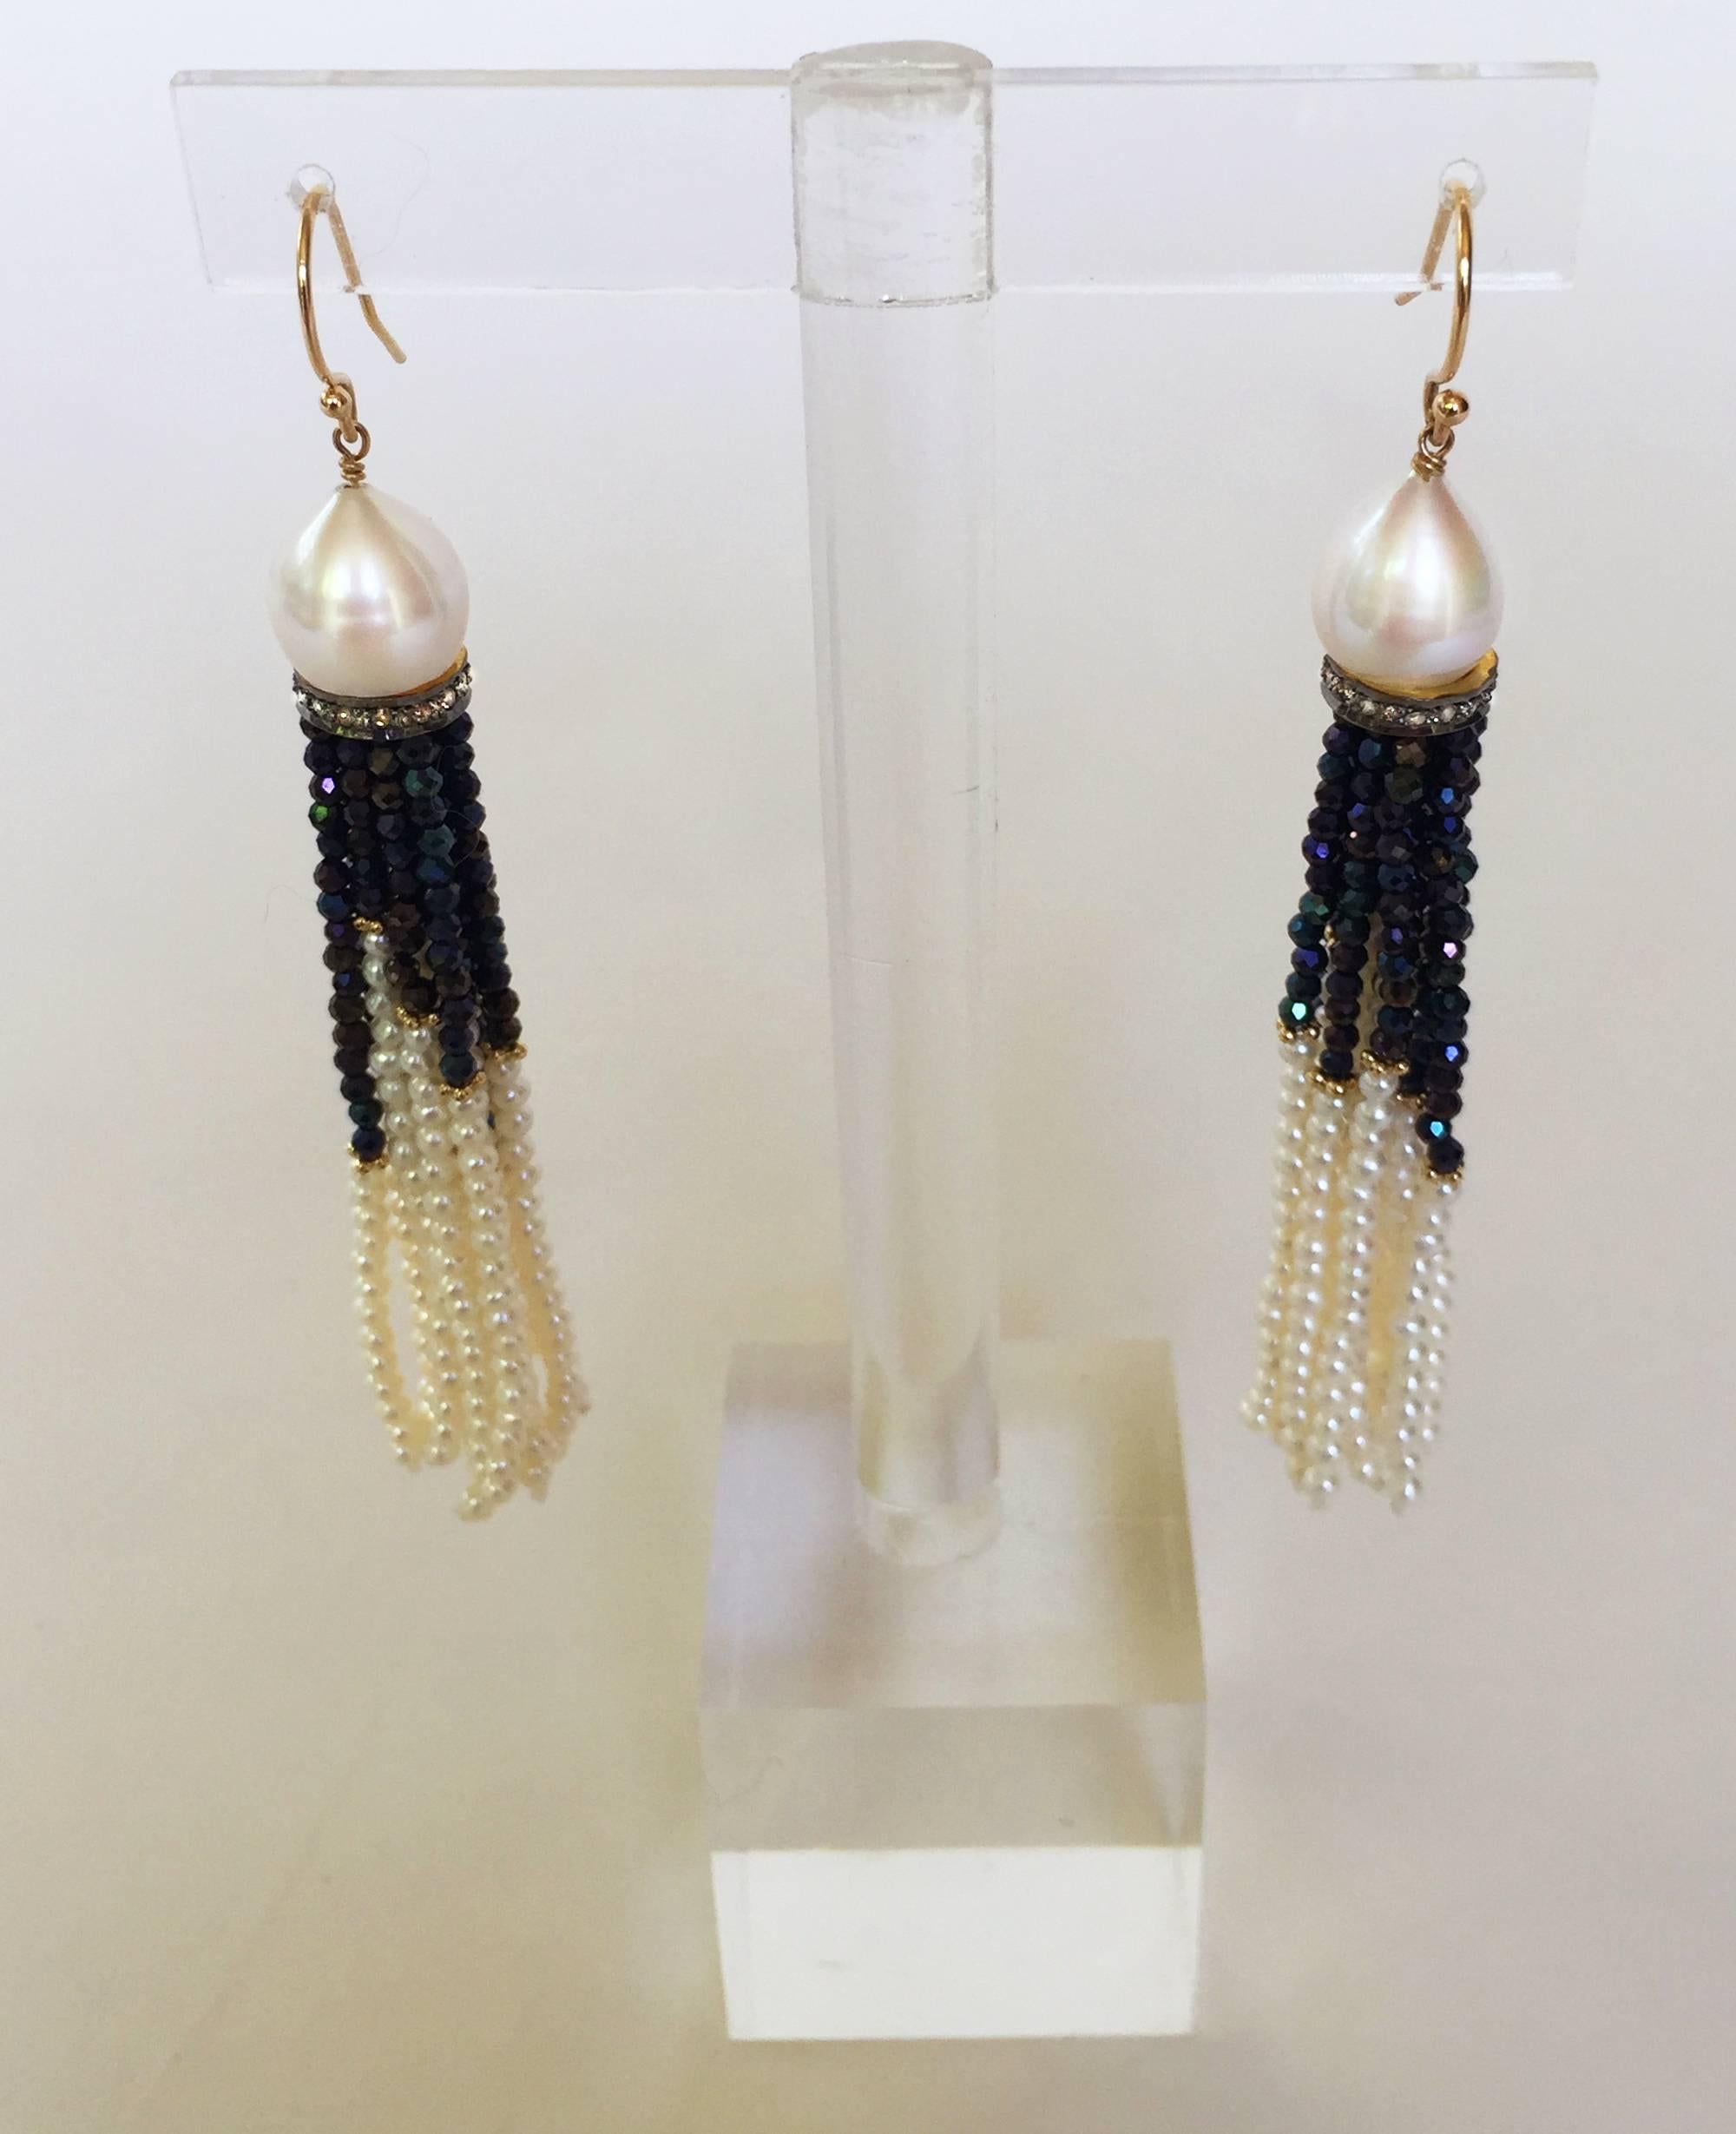 Women's Pearl, Black Spinel and Gold Dangle Earrings by Marina J